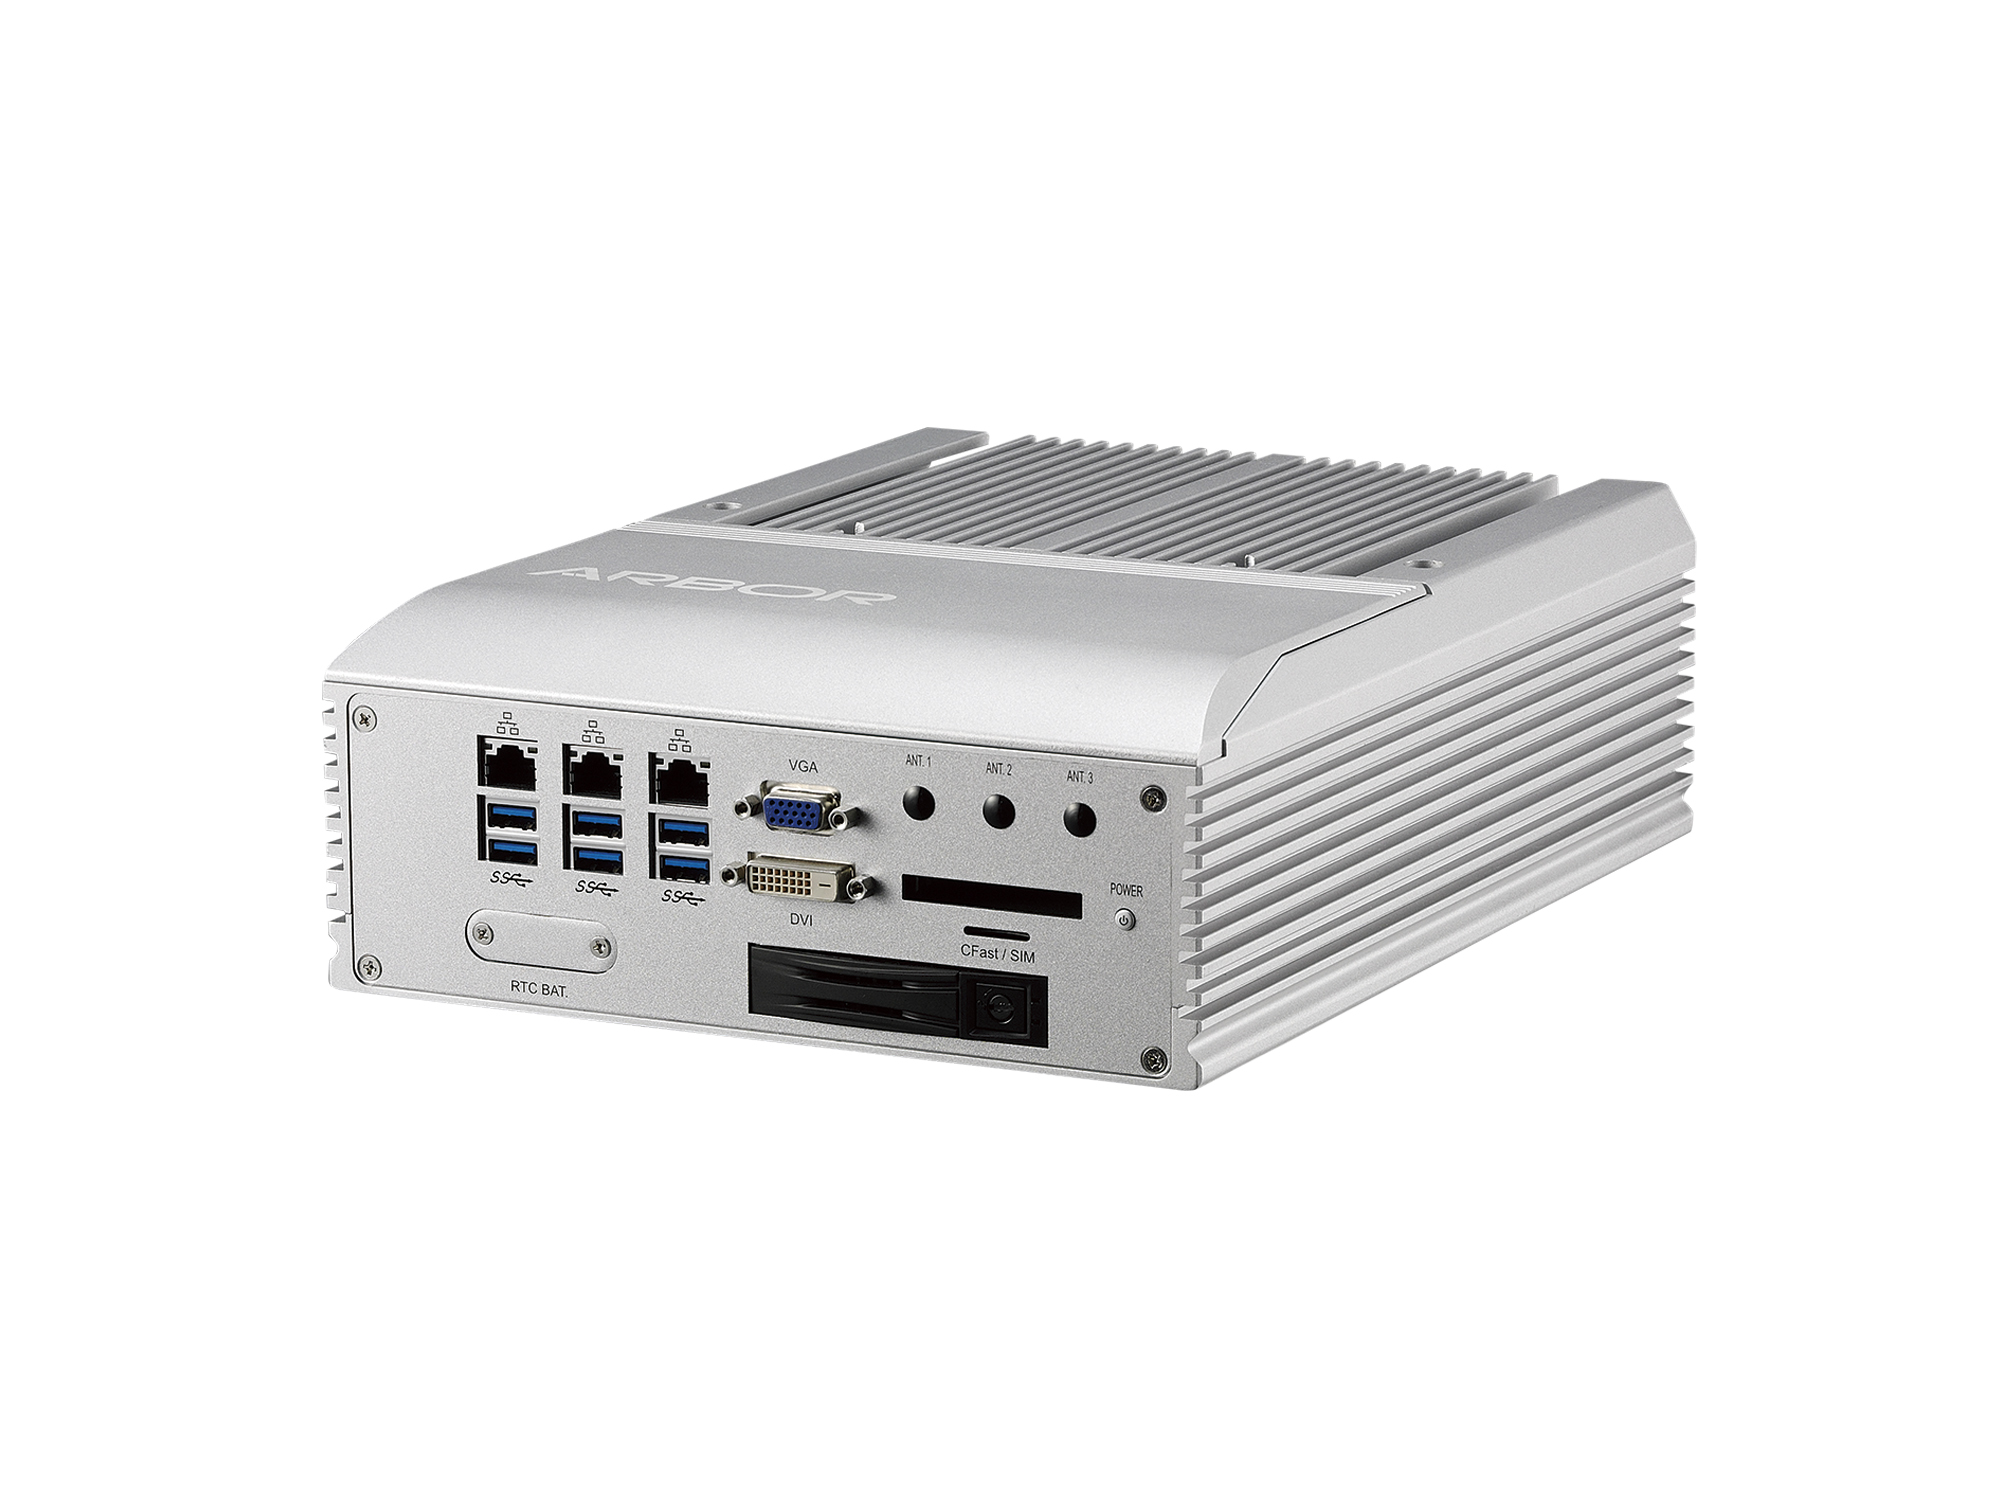 Fanless High-Performance In-Vehicle Surveillance Computer